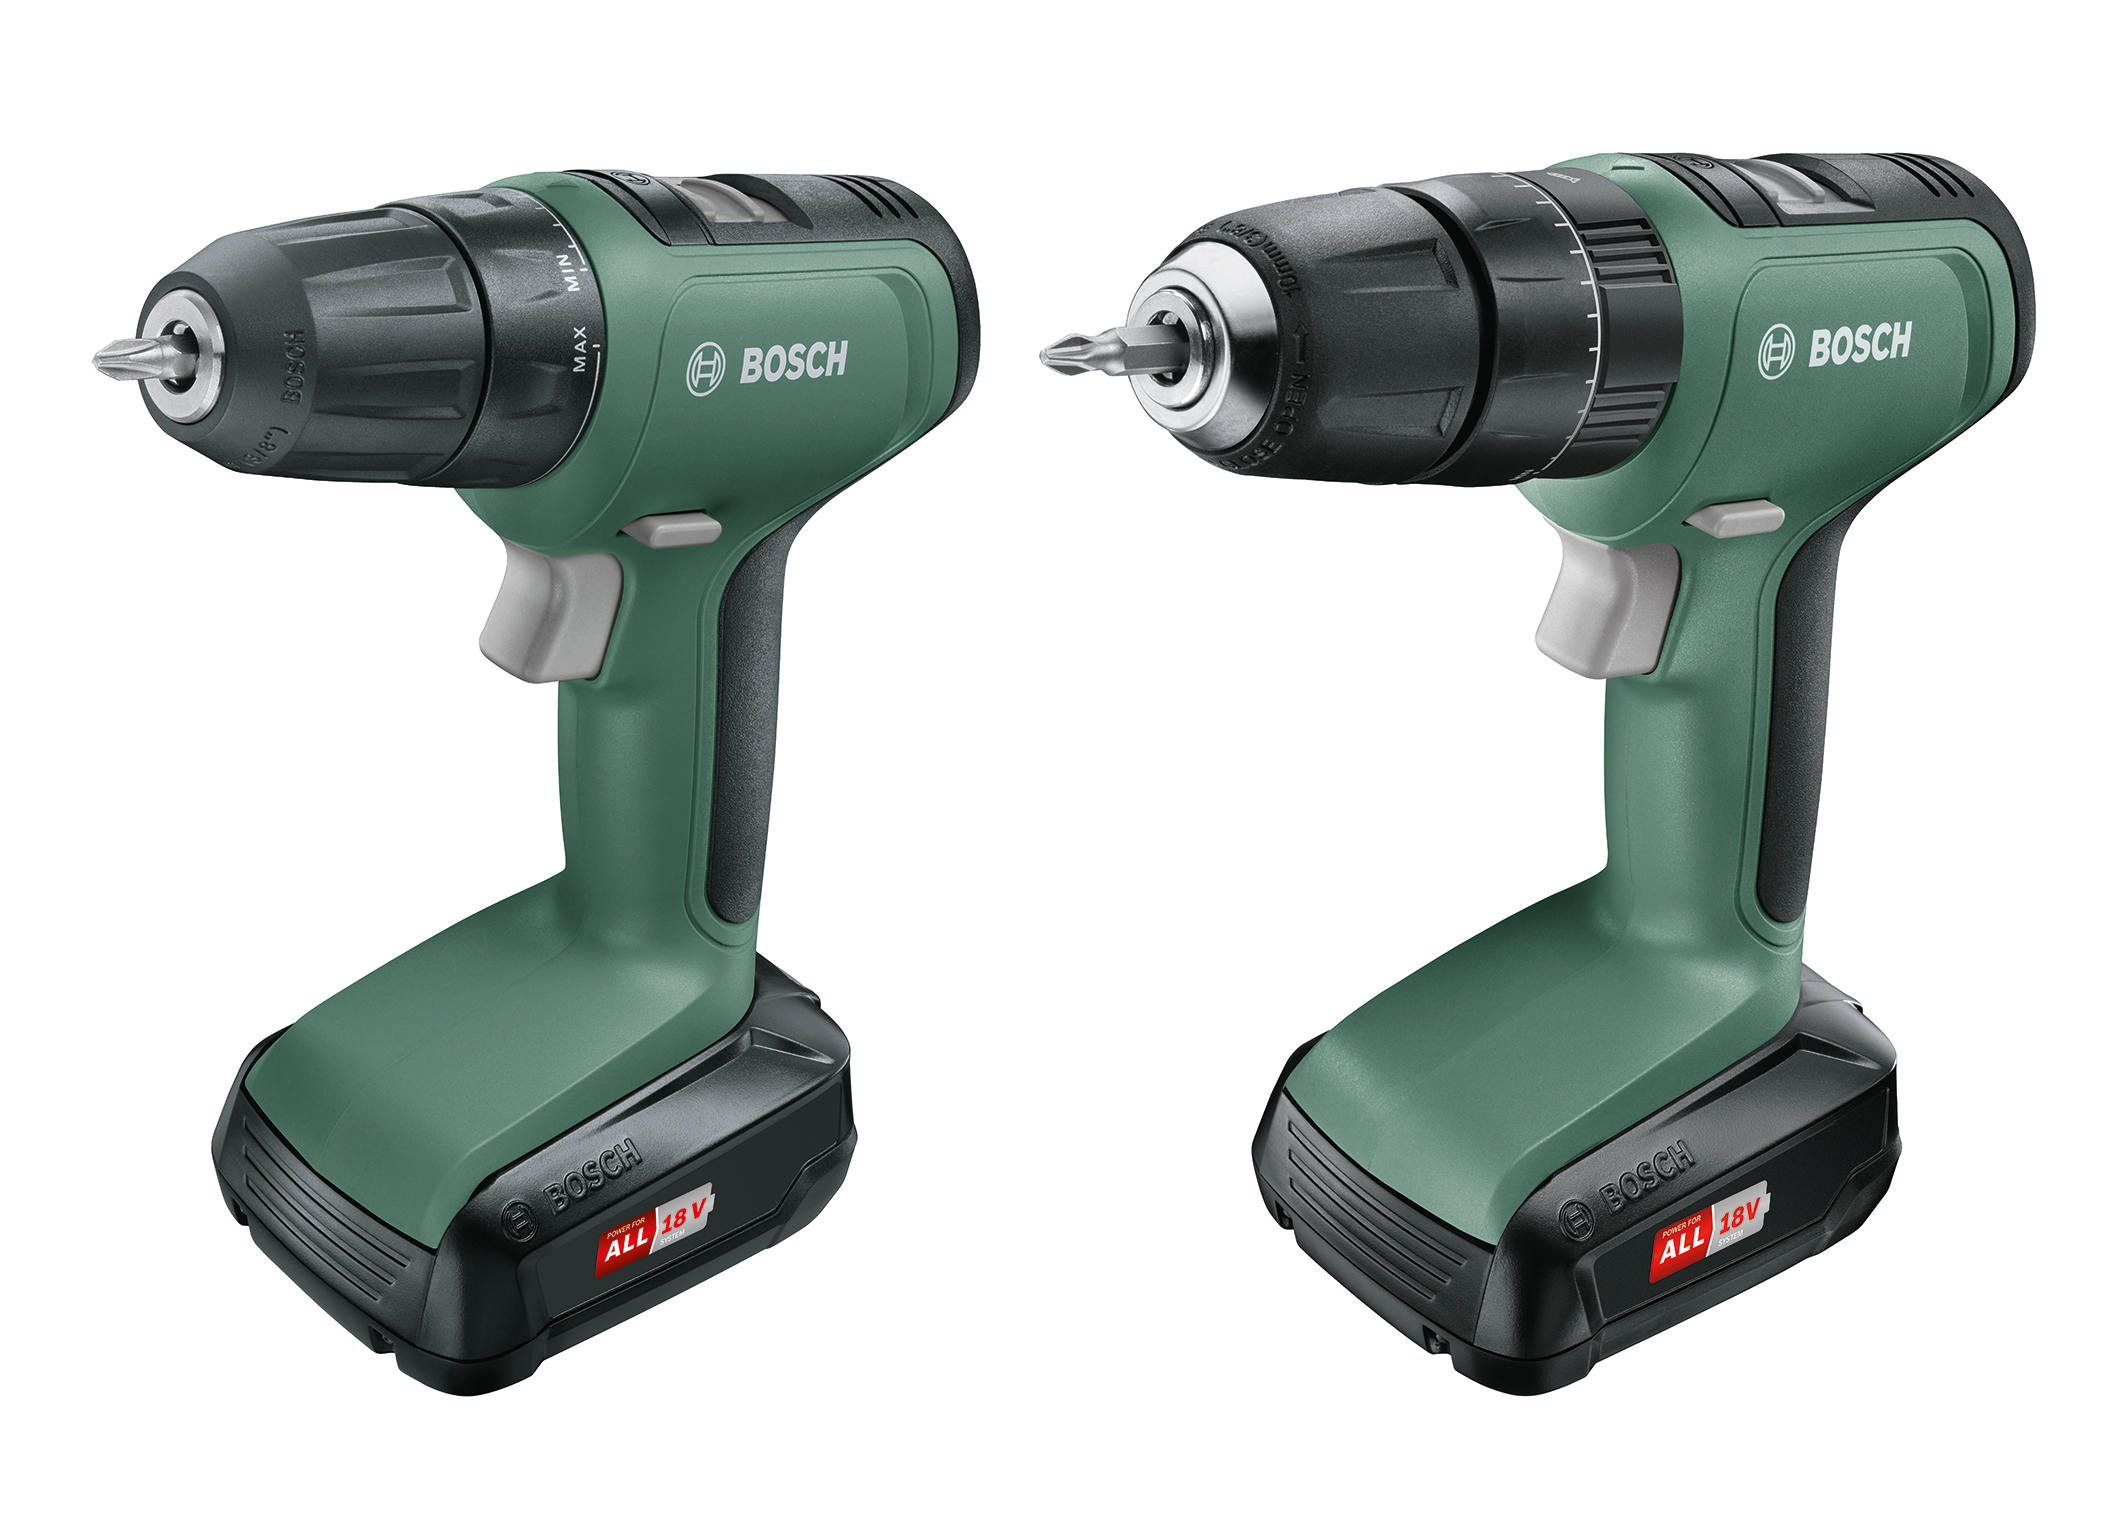 Four new cordless tools for home and garden Bosch expands 18 volt